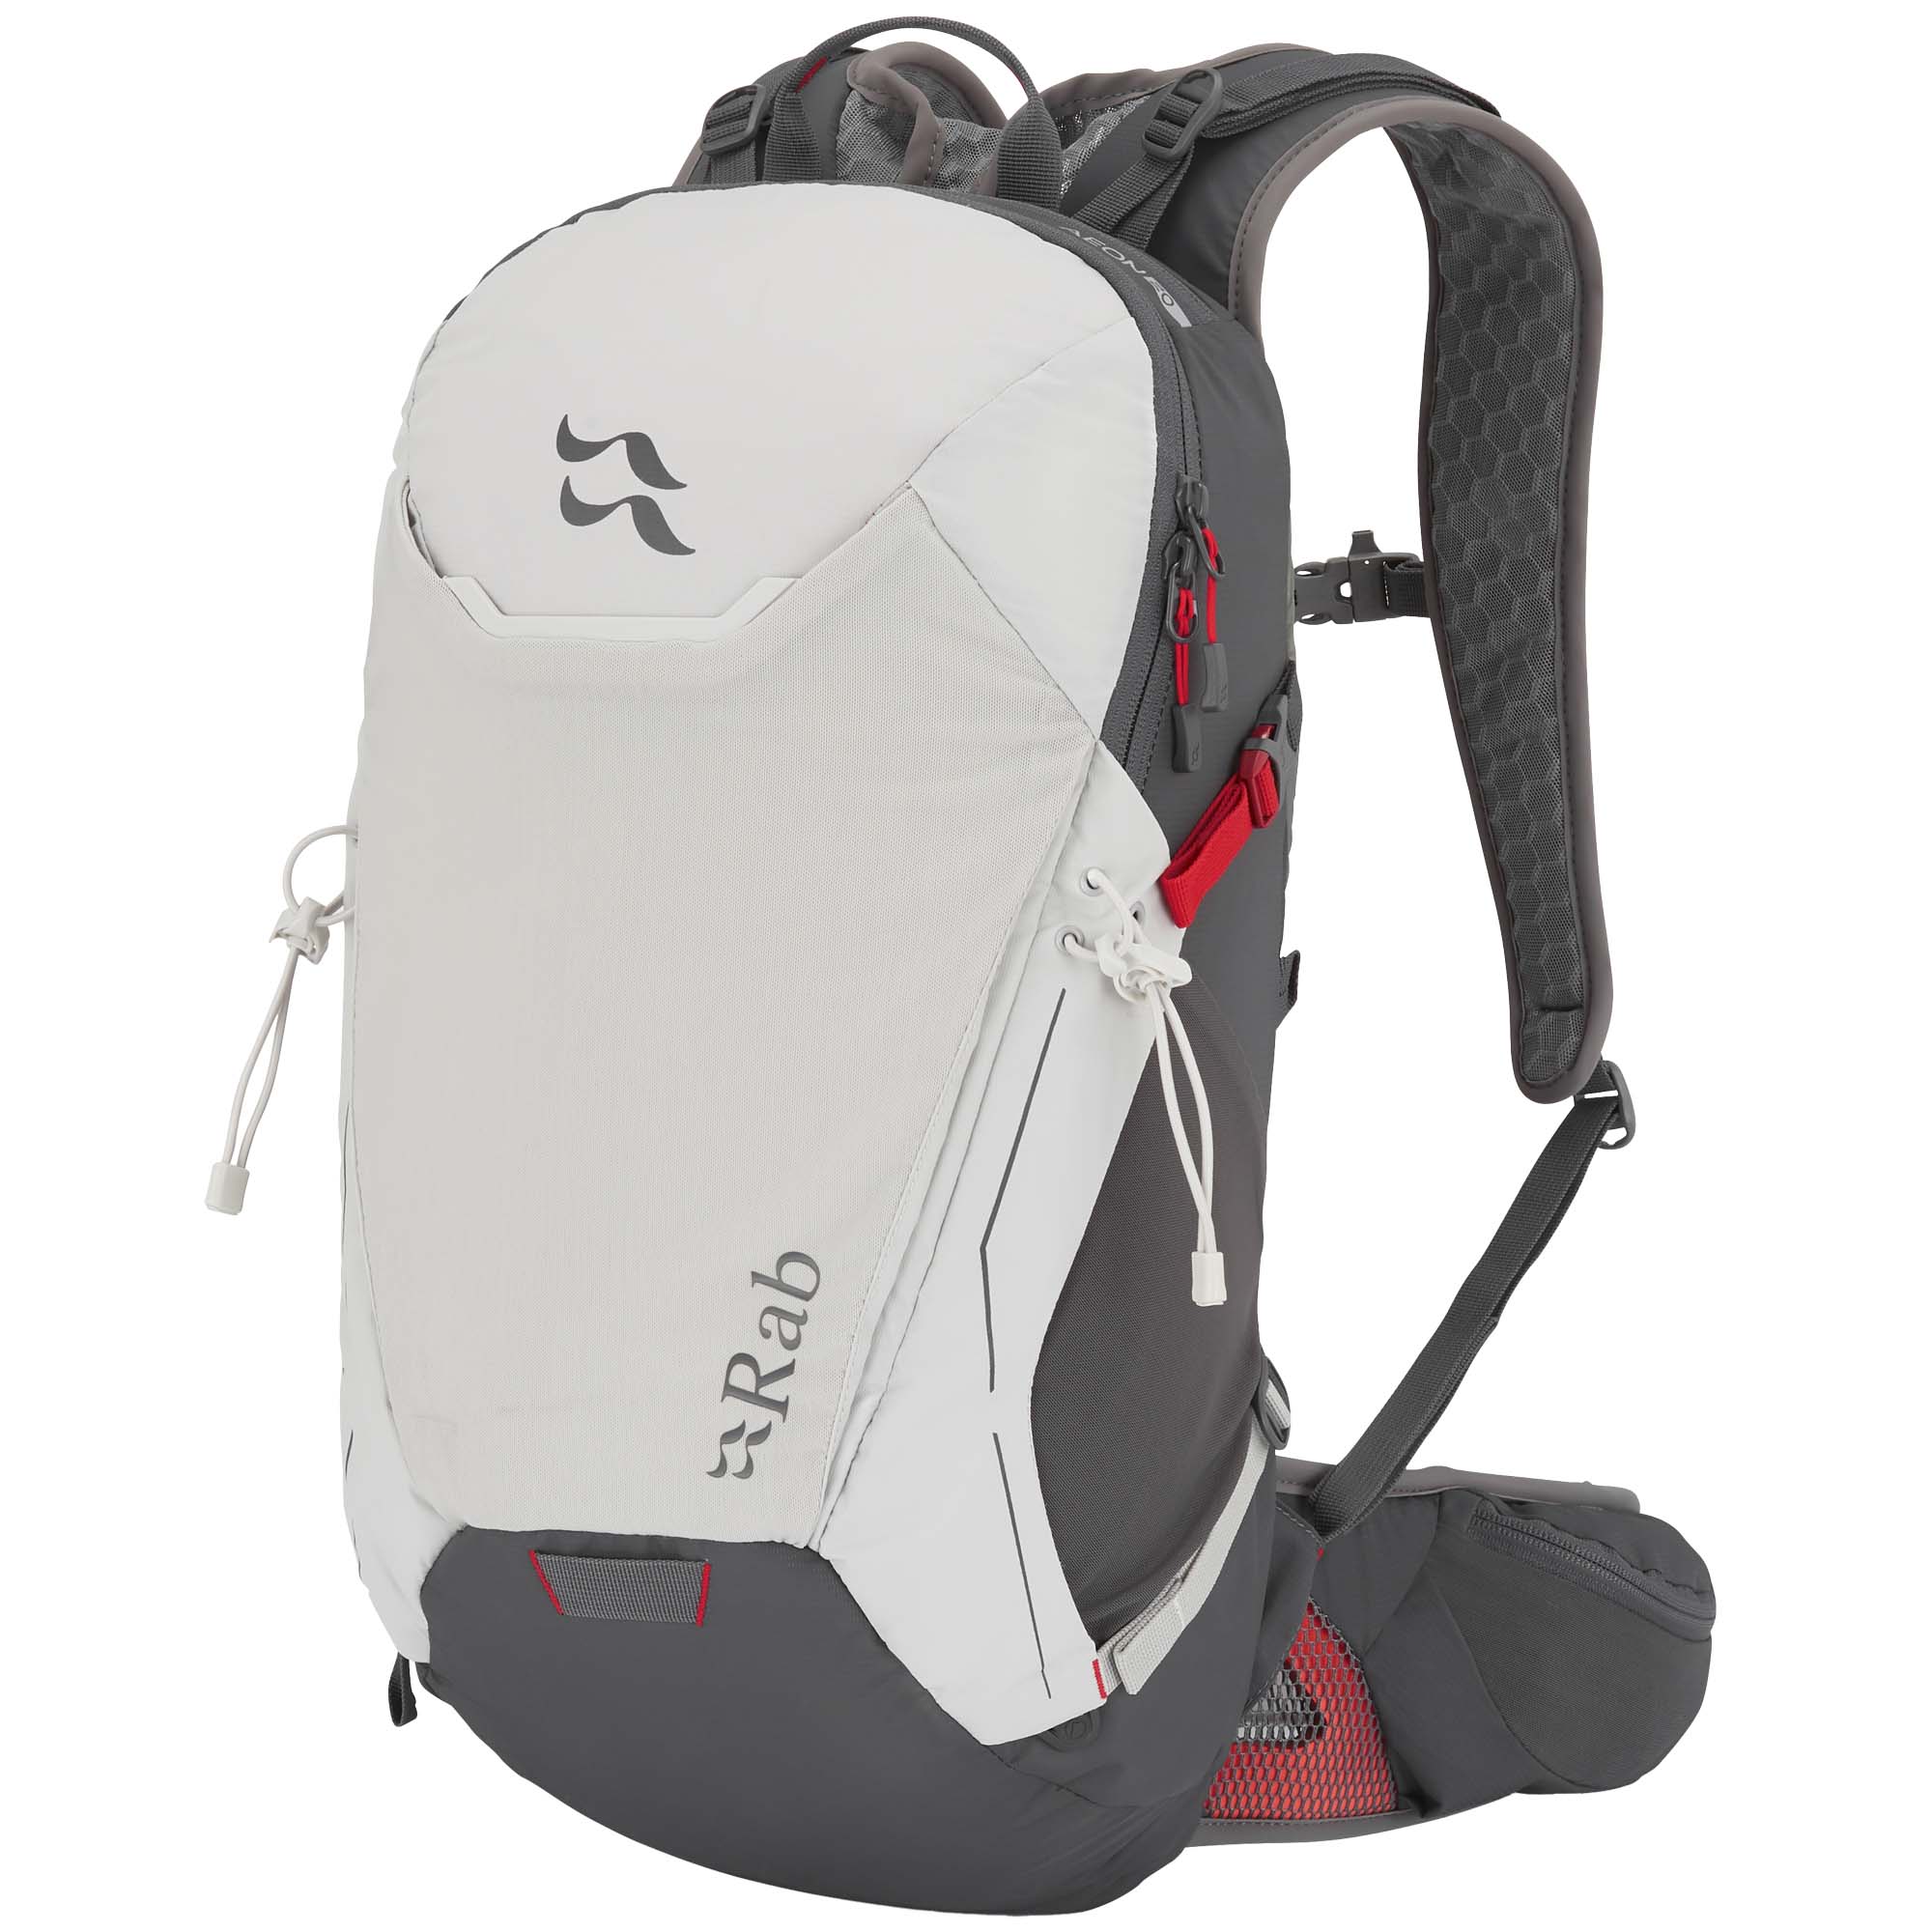 Rab Aeon 20 Technical Daypack/Backpack